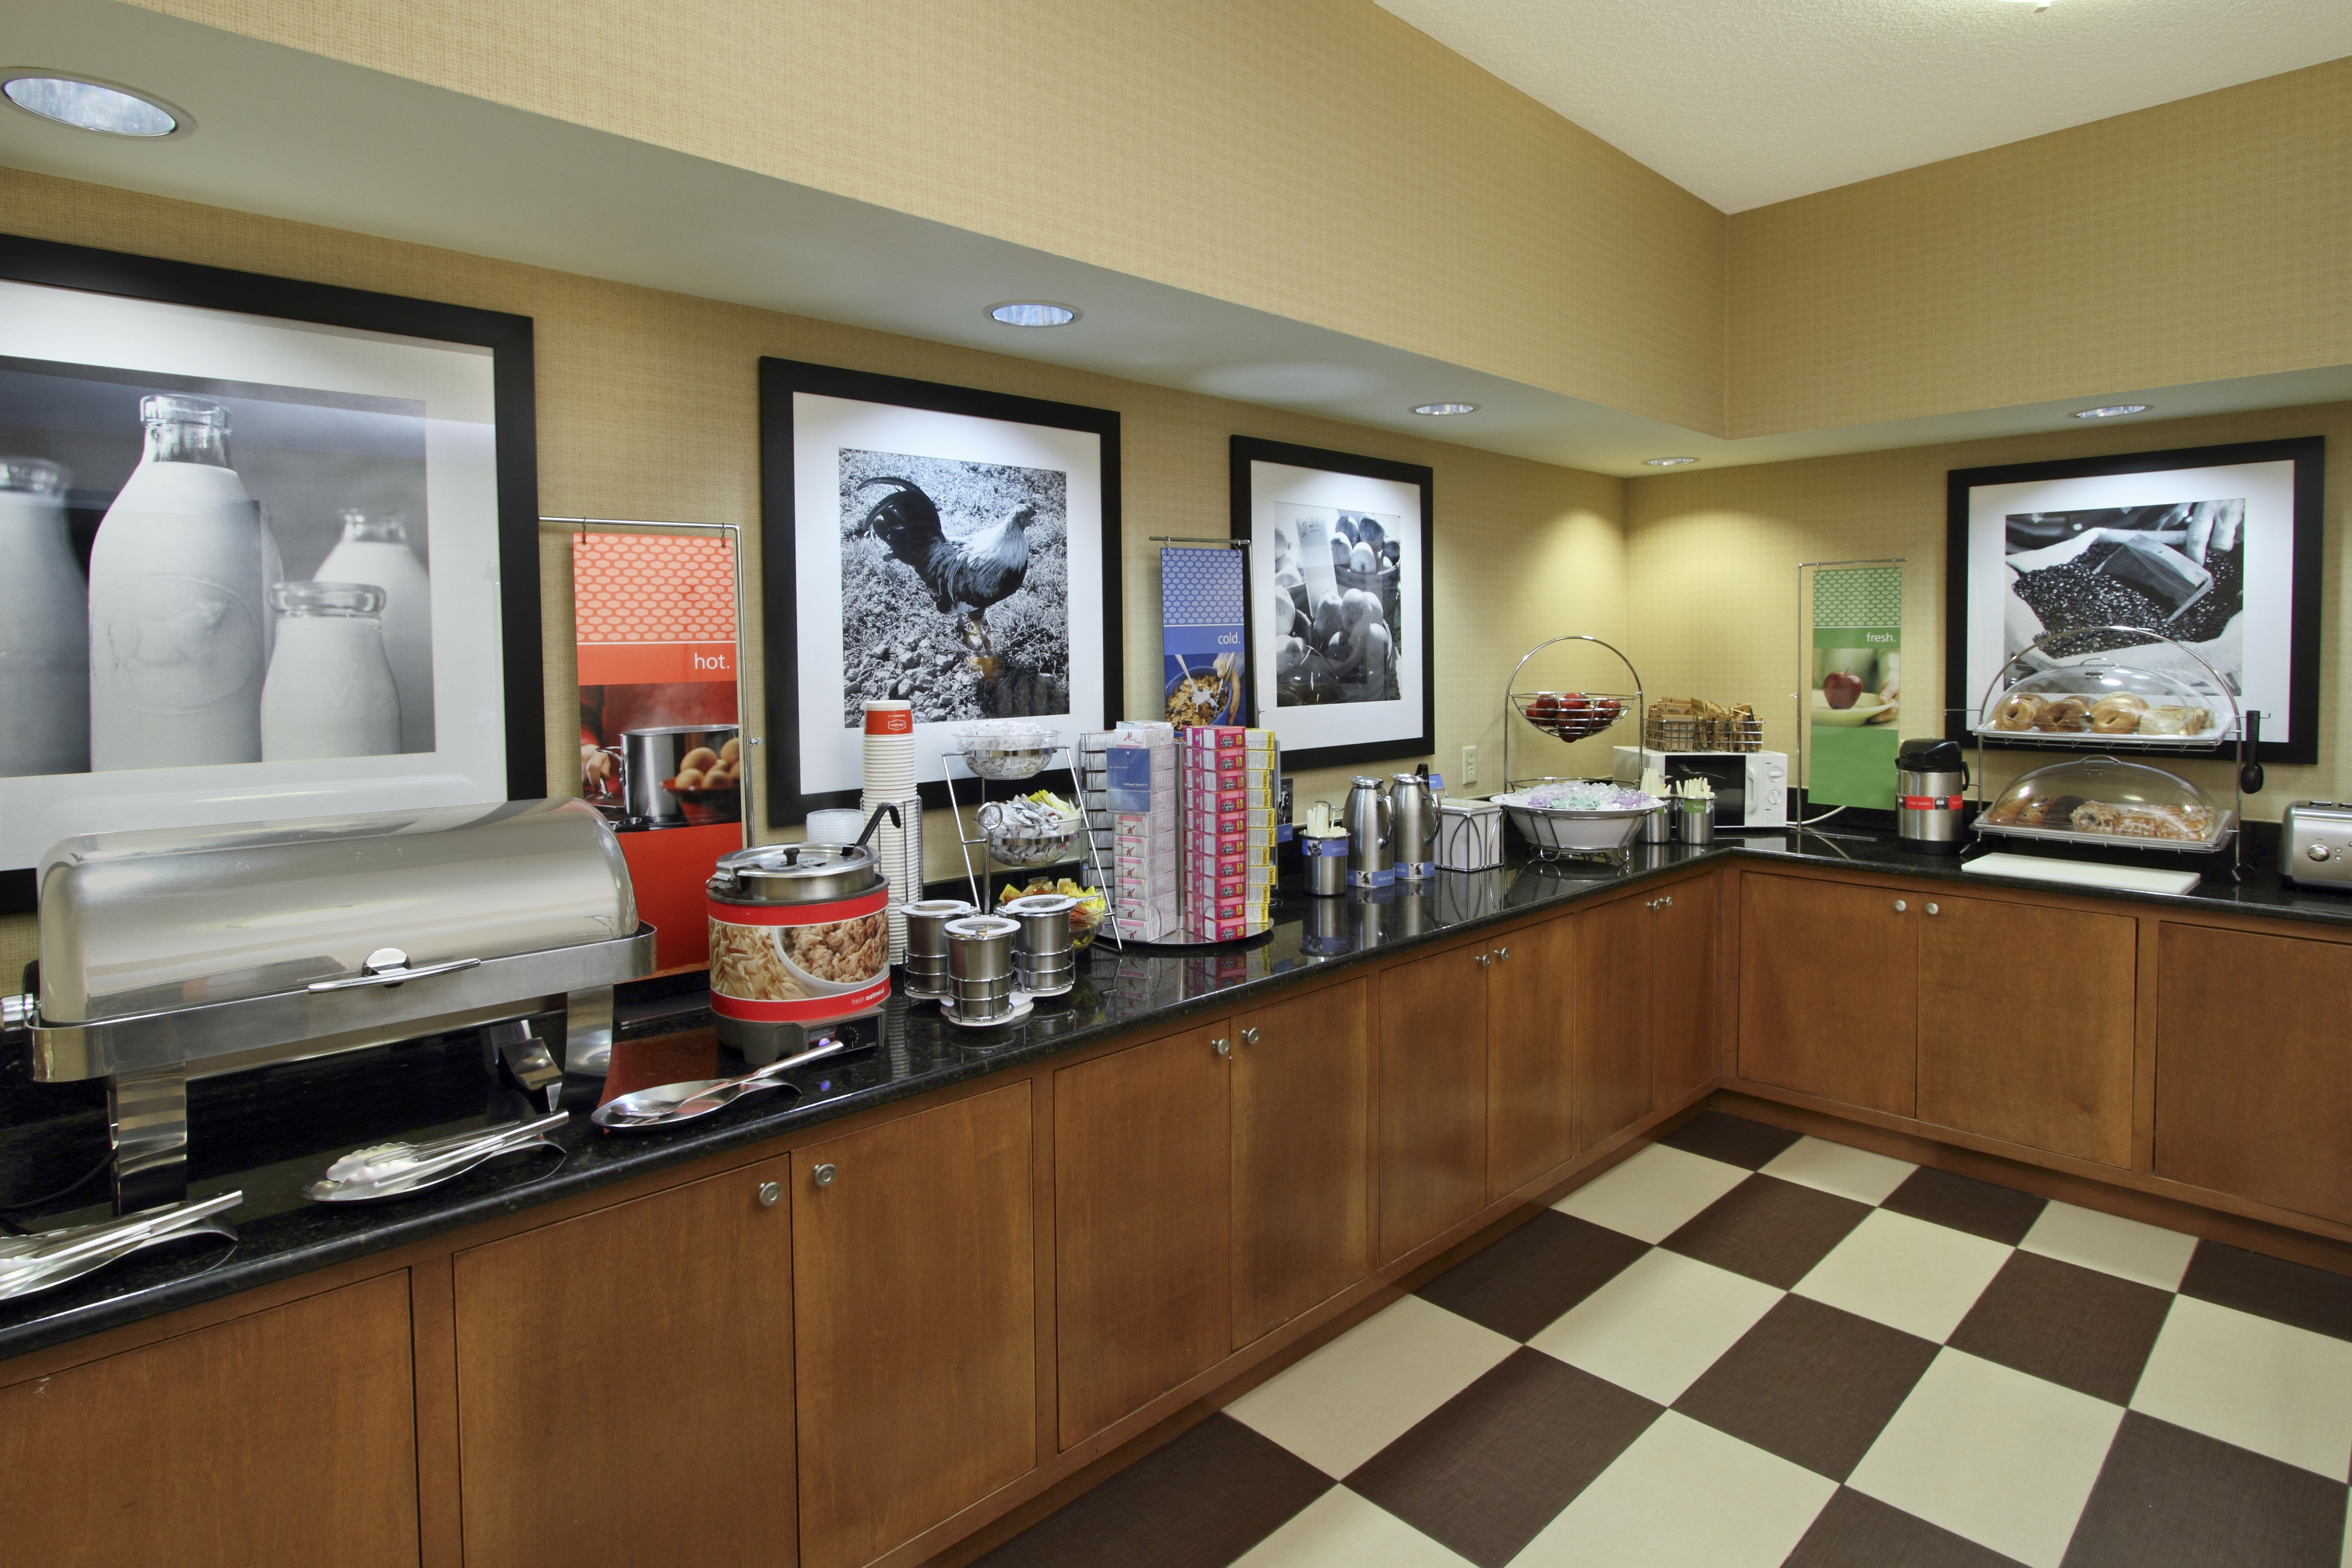 Hot and Cold Buffet Selections on Counters of Breakfast Area